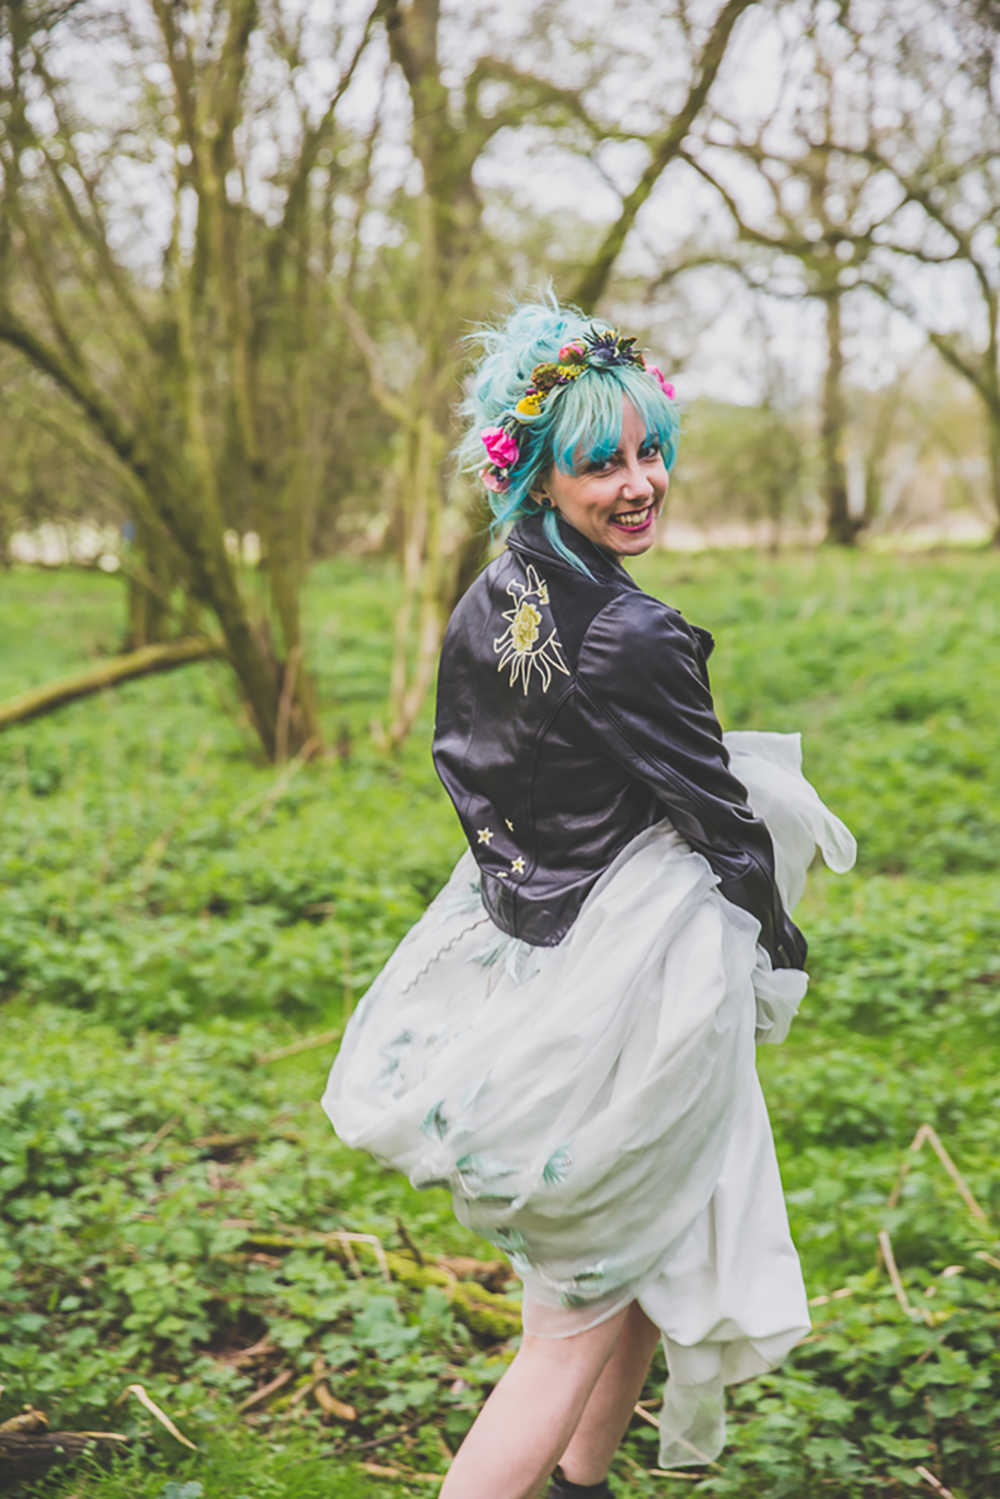 Rainbow Woodland Wedding with Hand Painted Leather Jacket and Doc Martin Bridal Shoes